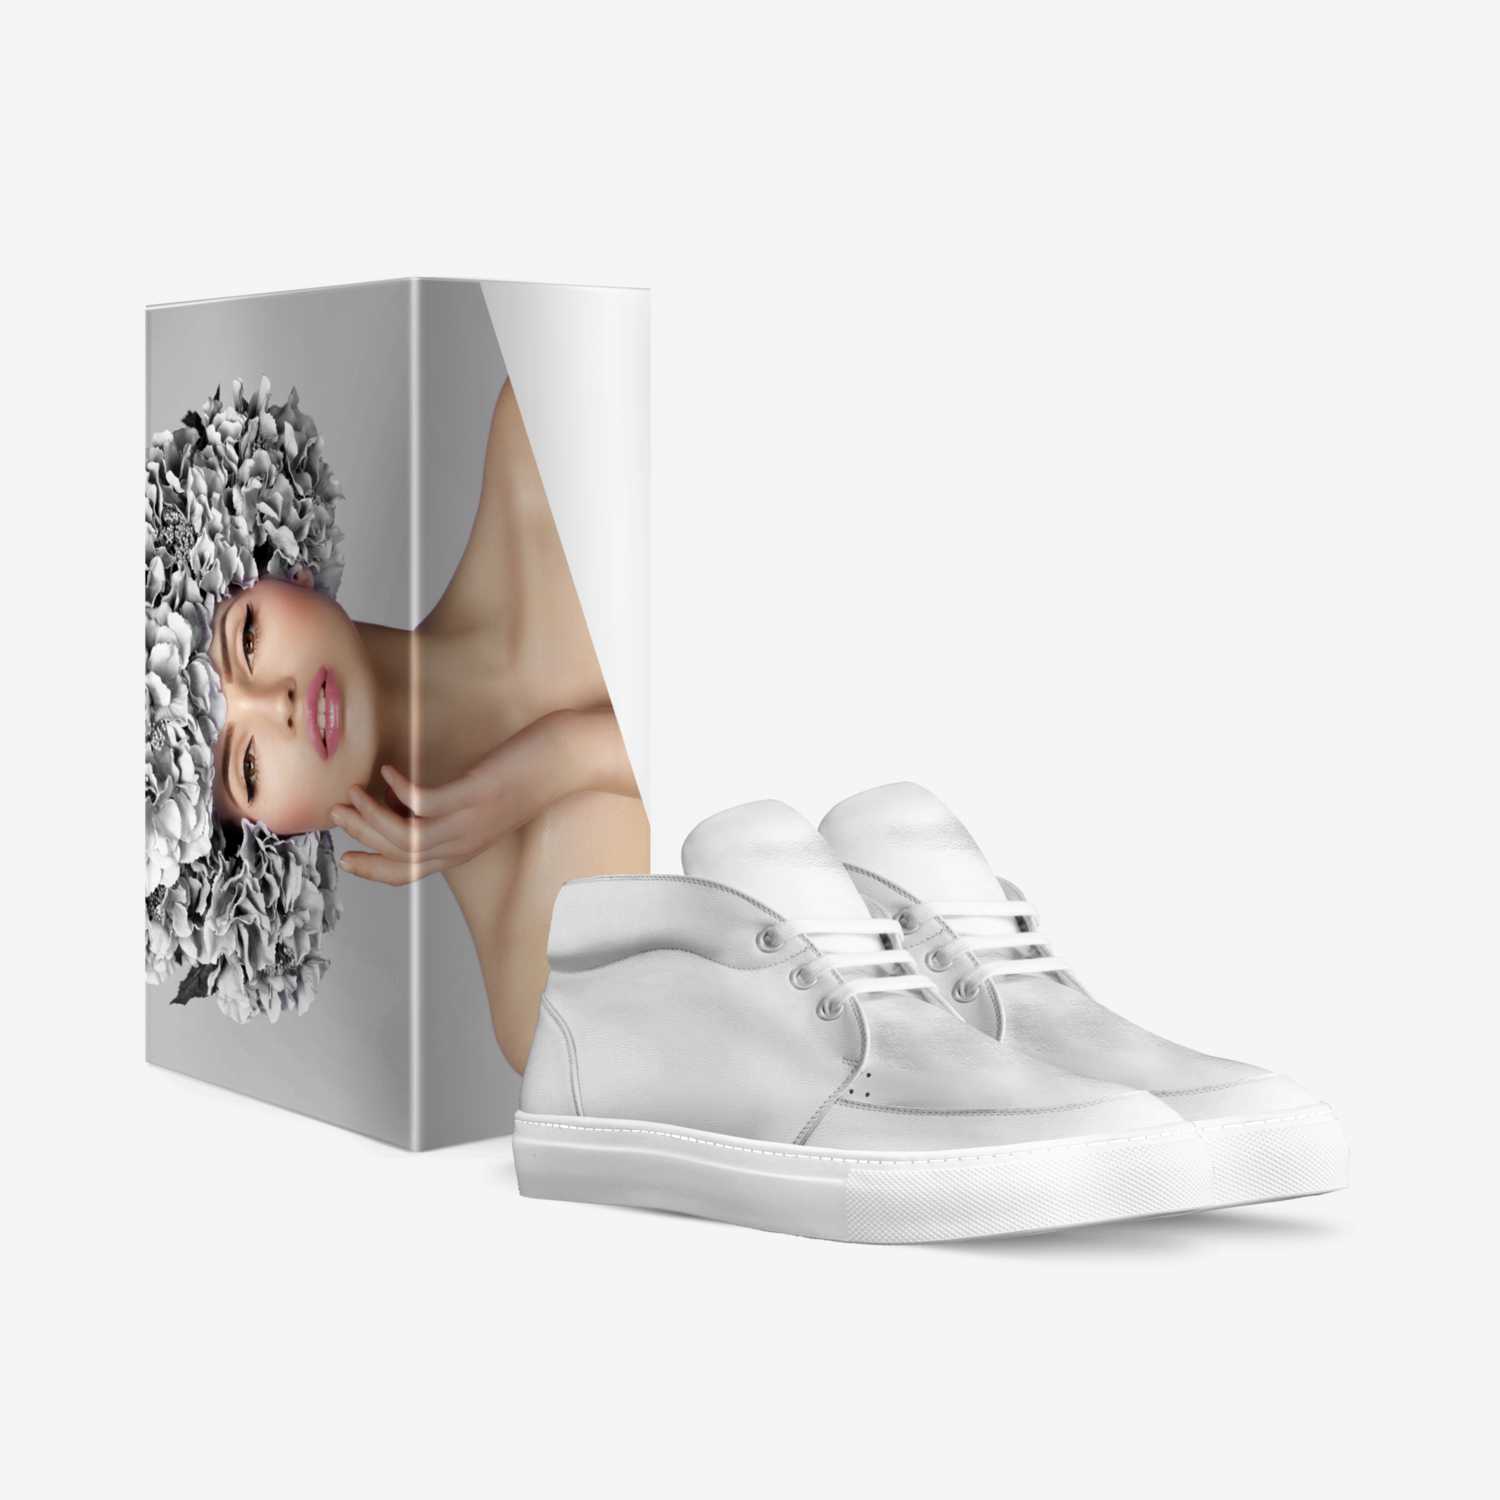 LaMonte White custom made in Italy shoes by Lamonte White | Box view